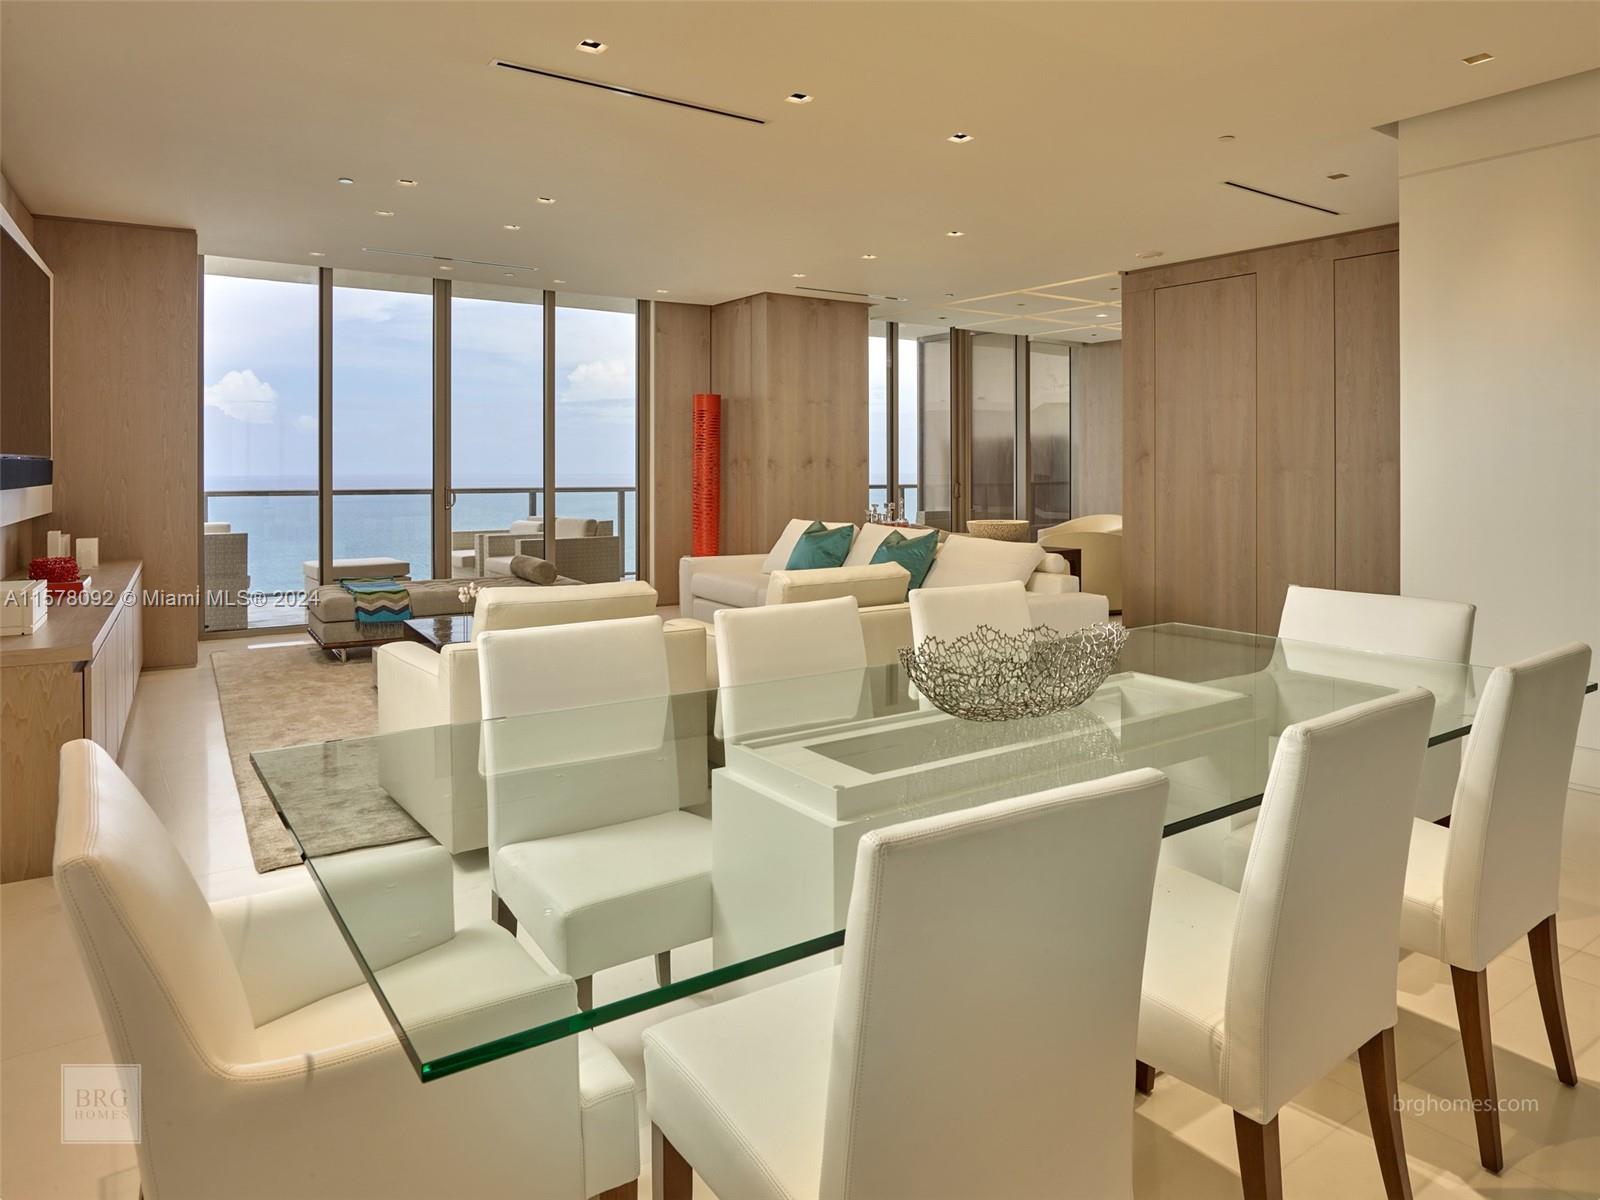 Photo of 9701 Collins Ave #2704S in Bal Harbour, FL